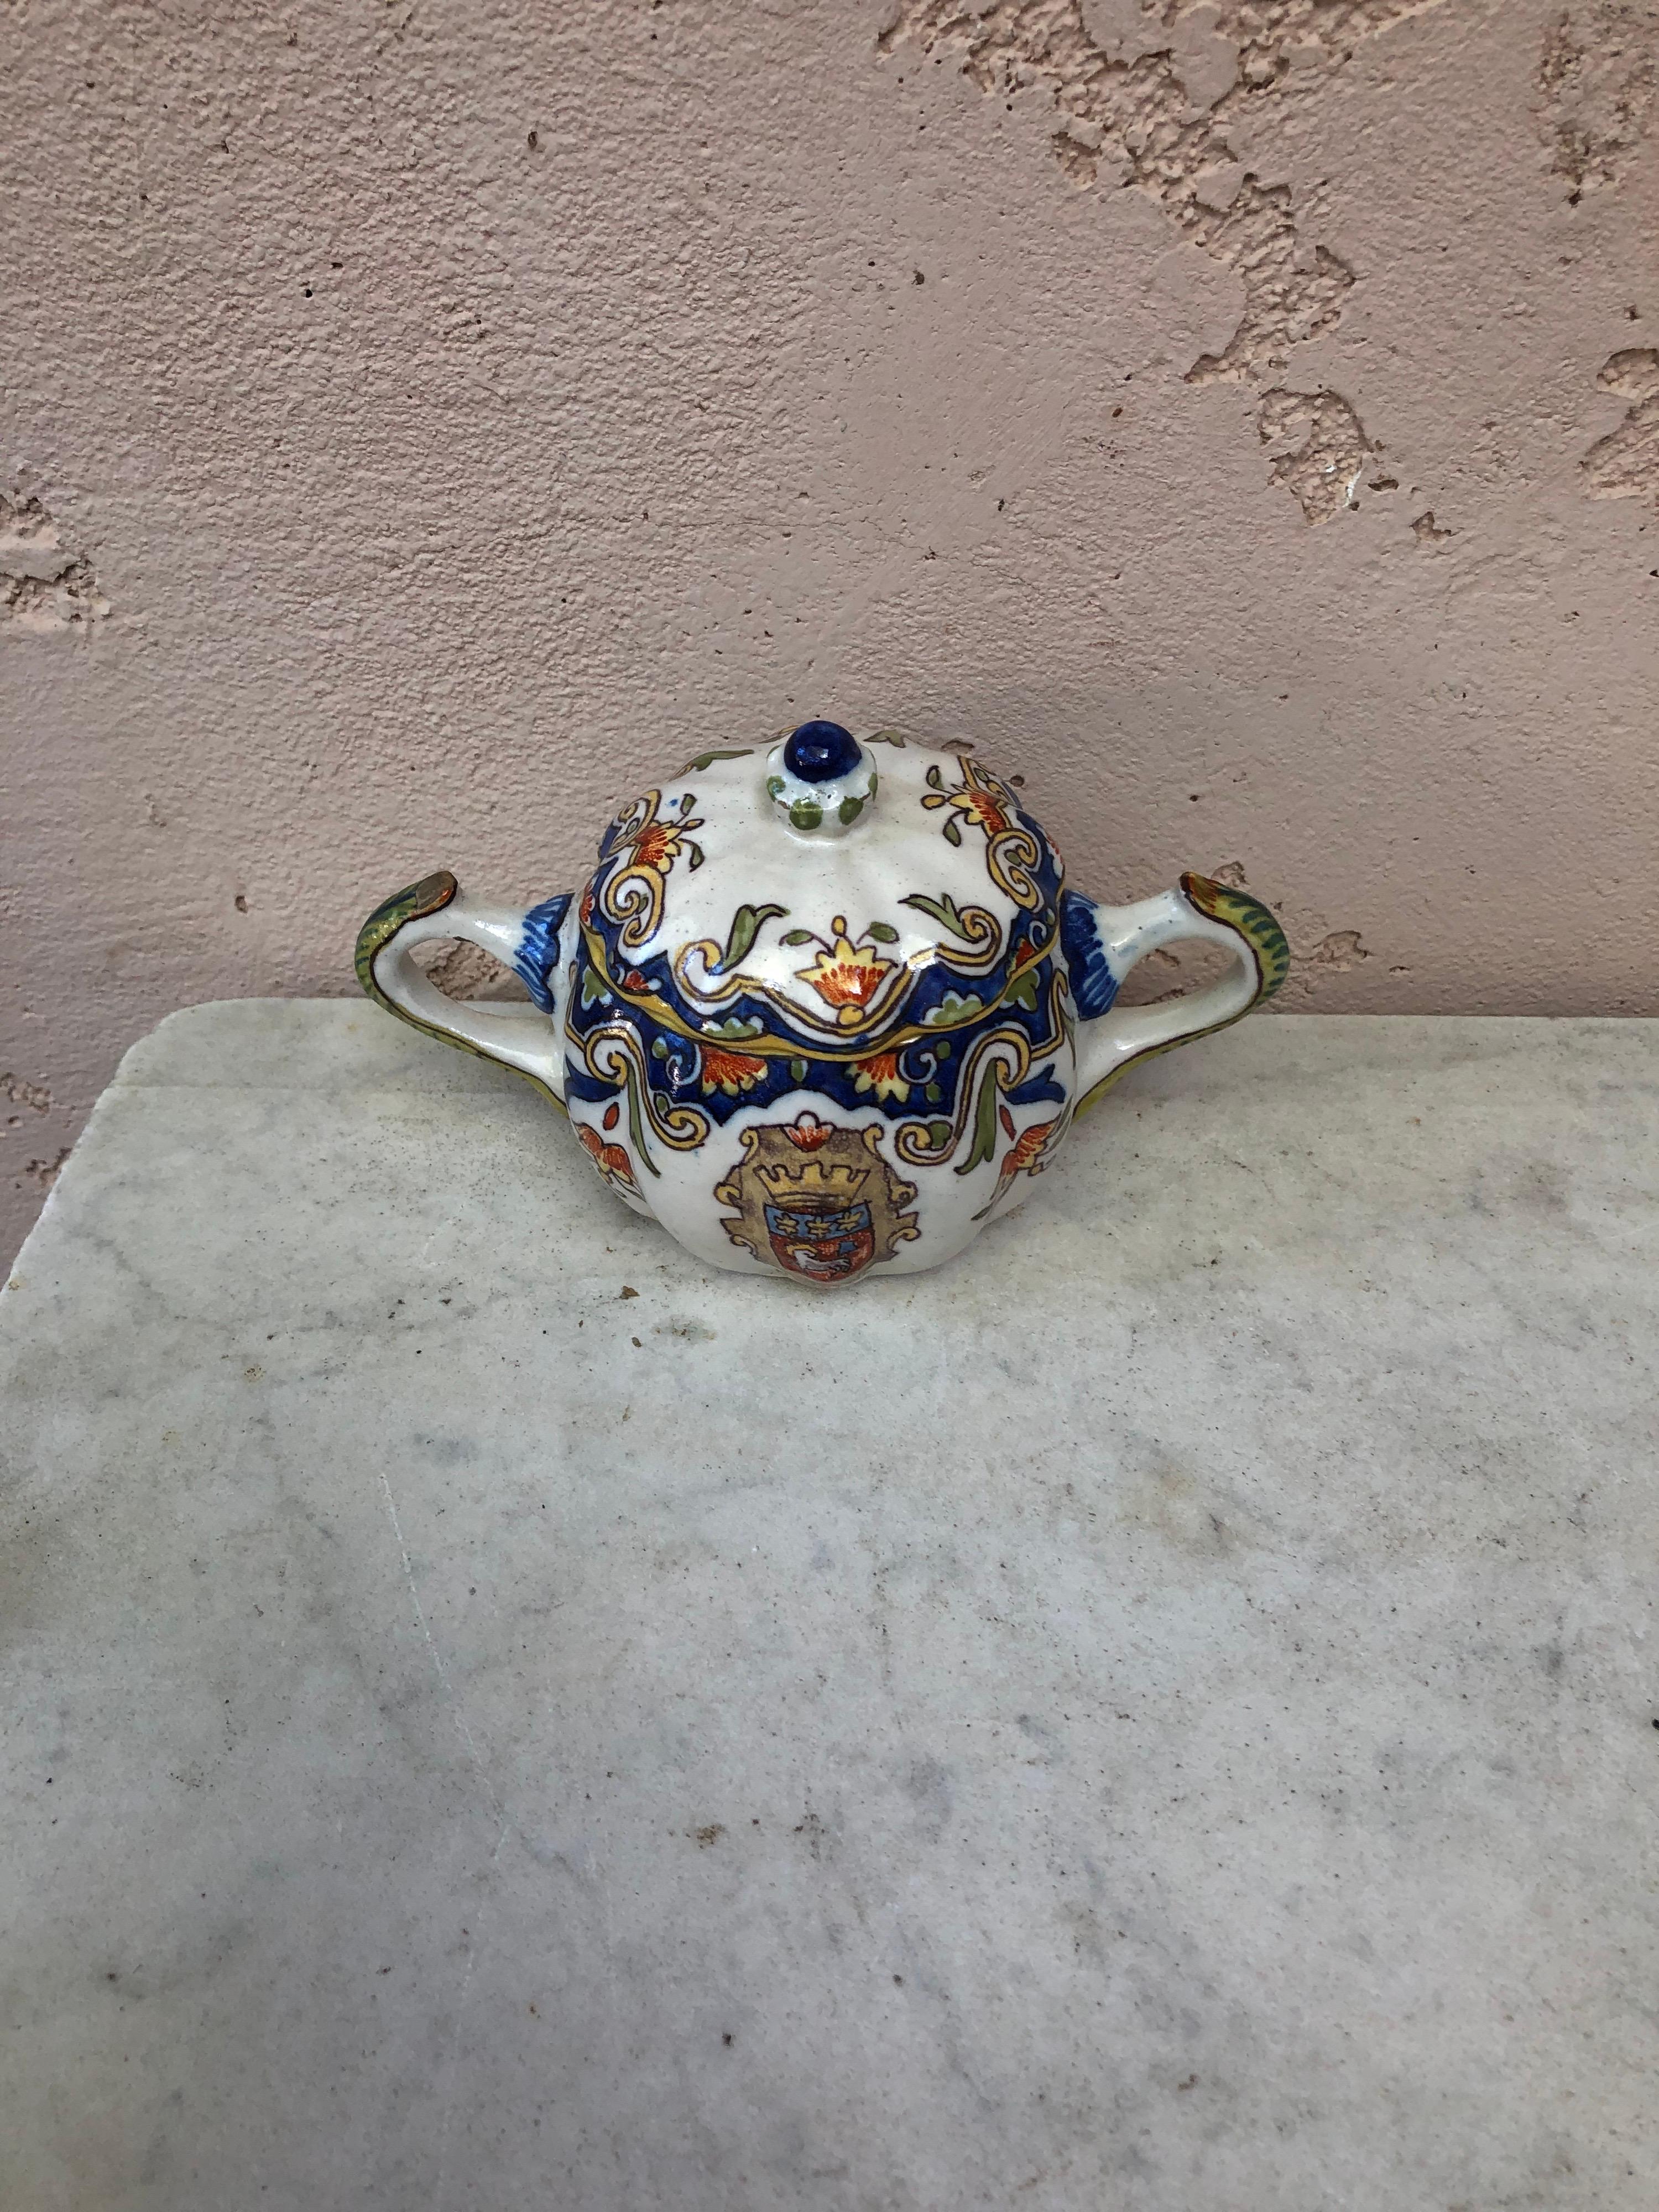 French faience covered handled bowl, circa 1900.
Coat of arms and floral pattern.